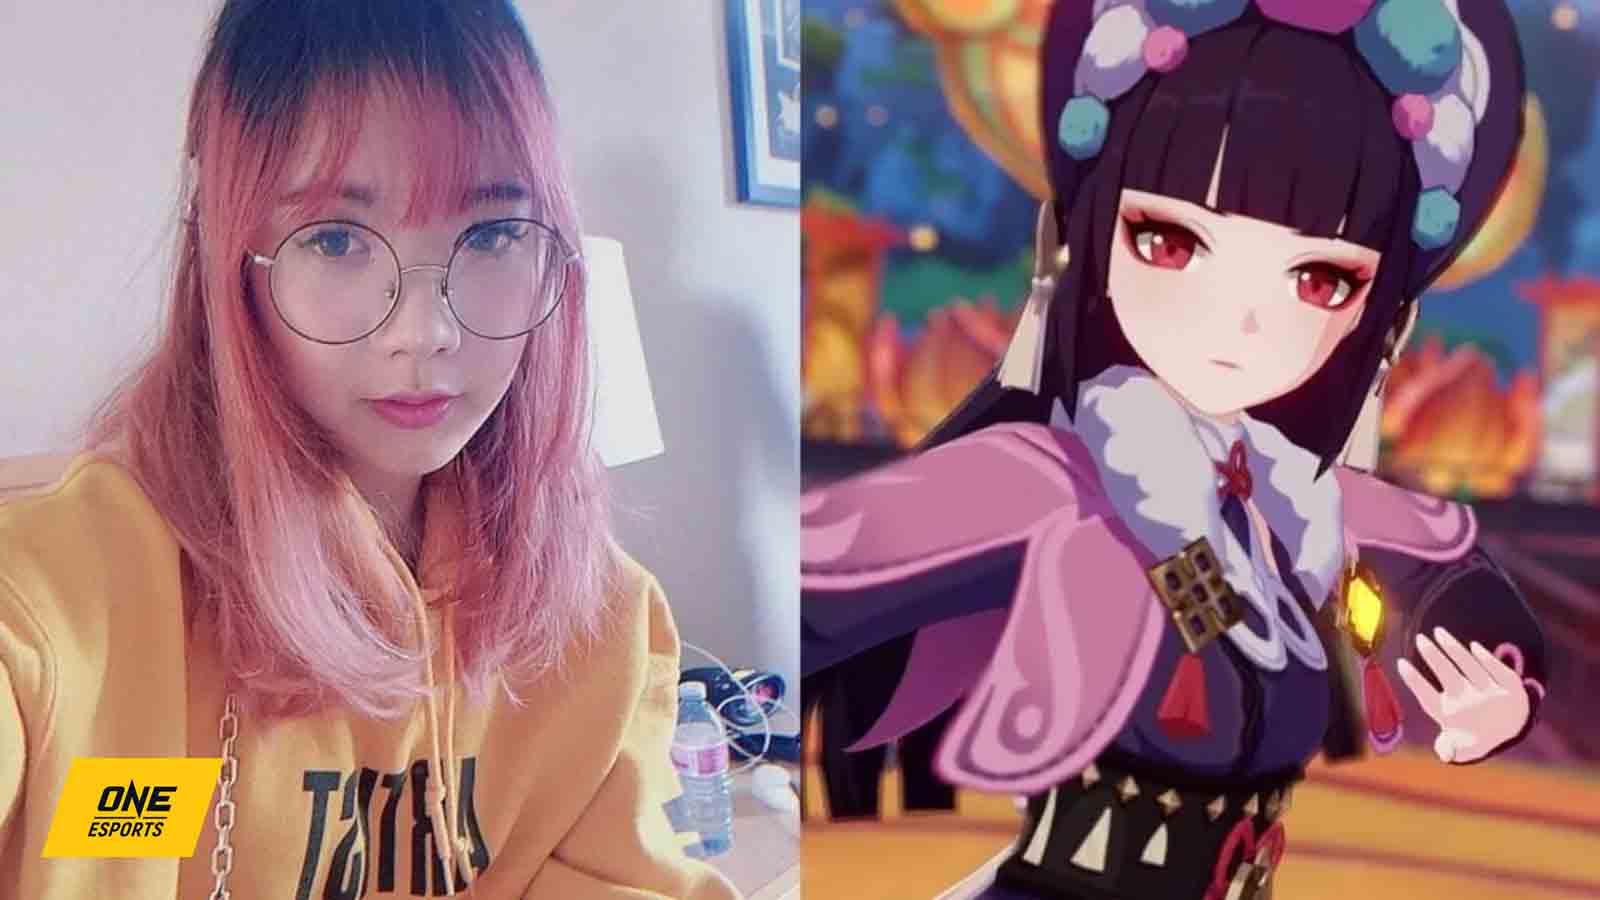 Sweet Sayu cosplay by Genshin Impact voice actor LilyPichu